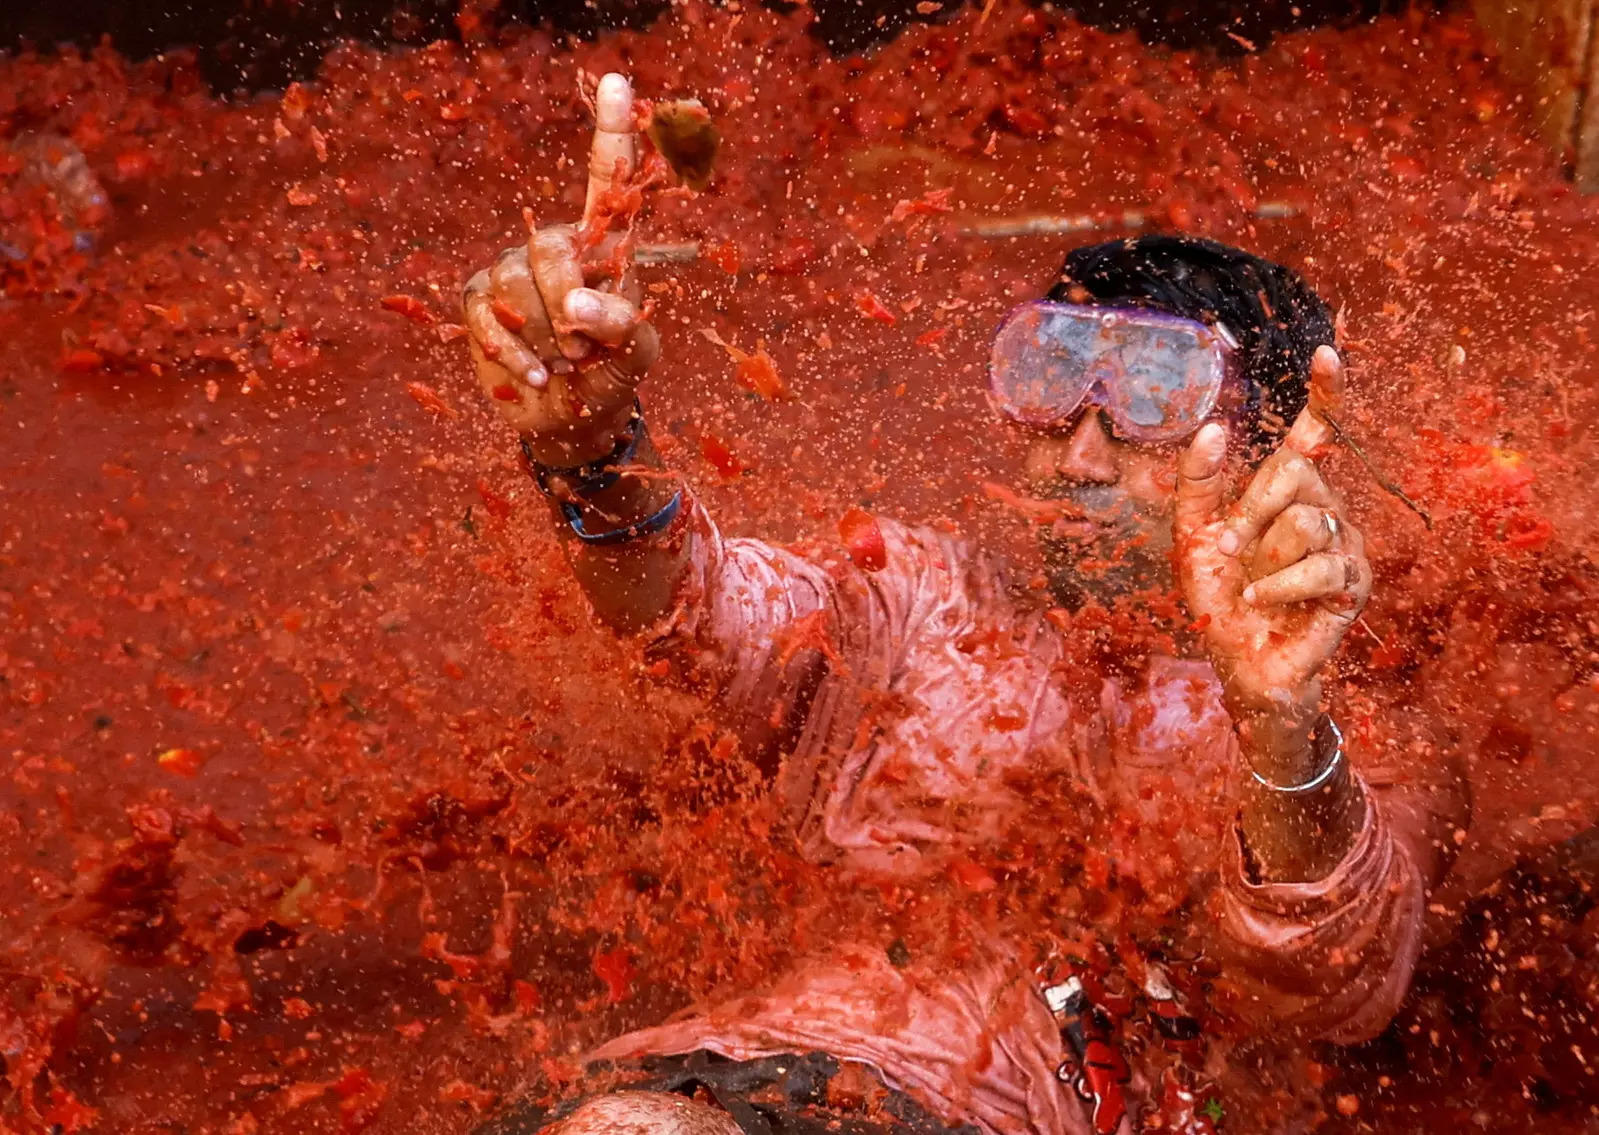 Fun-filled images from Spain's tomato fight festival La Tomatina